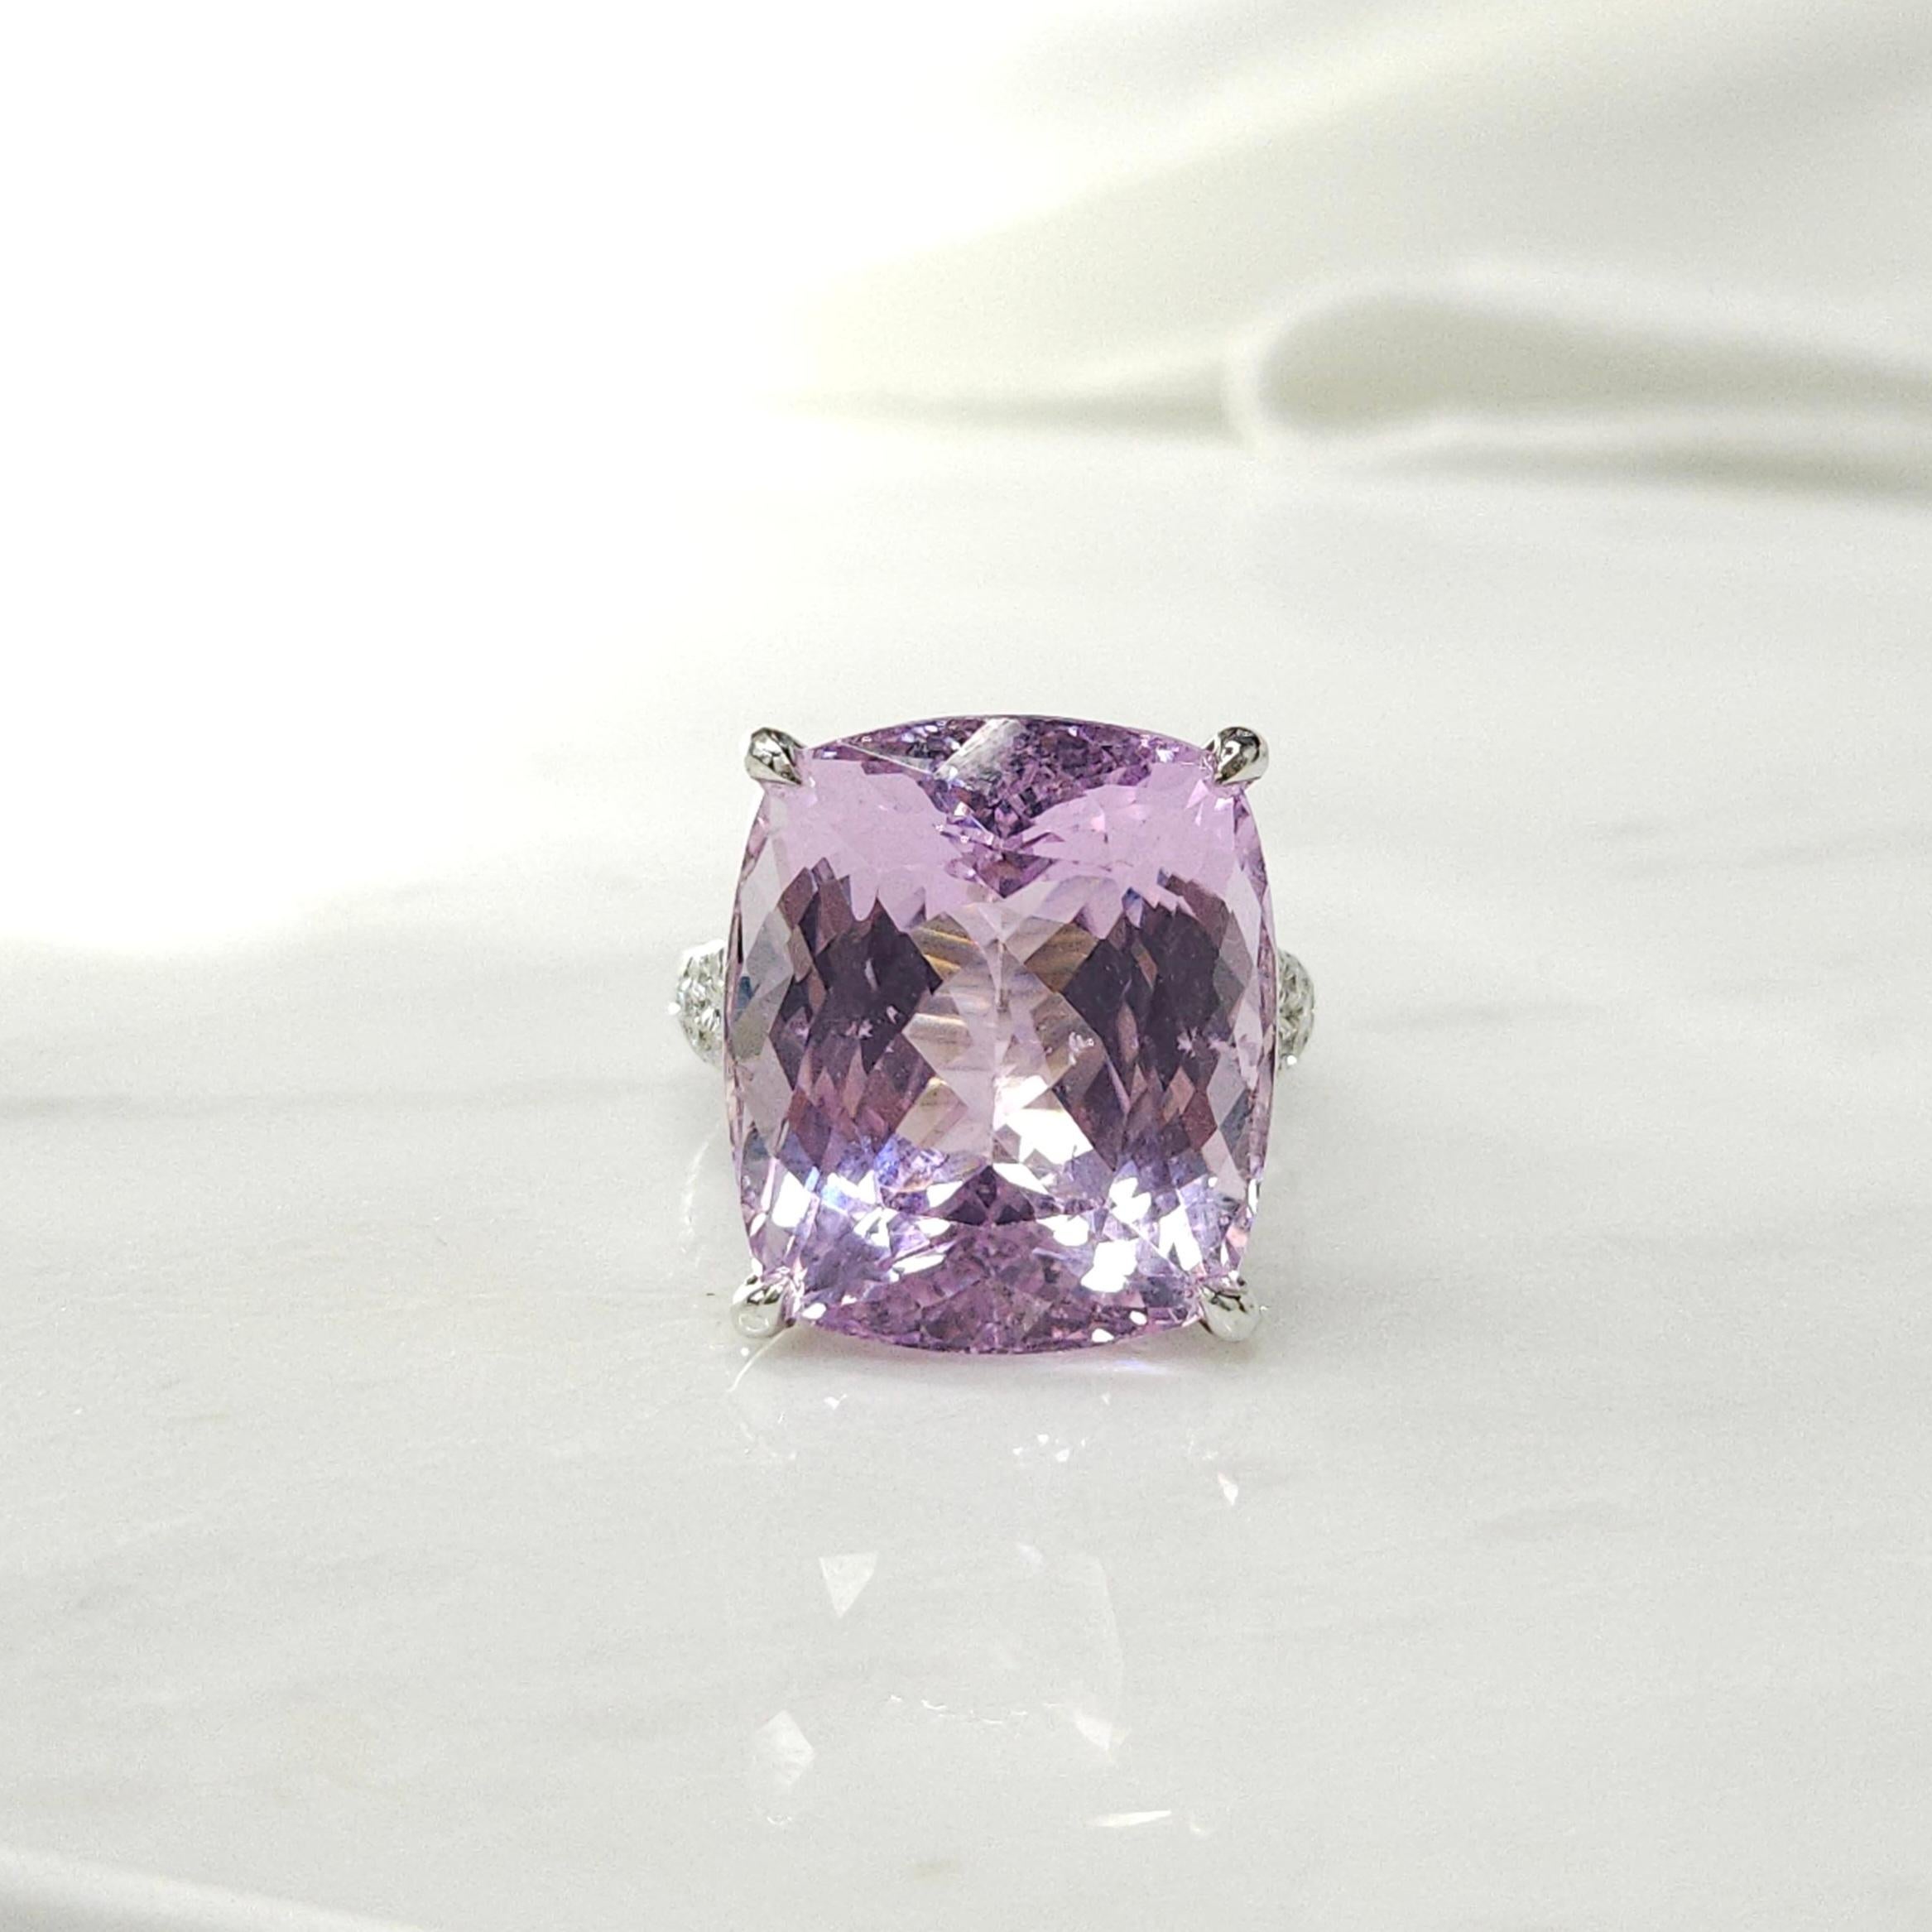 This stunning cocktail ring features an IGI Certified 24.20 Carat Kunzite in an intense purplish pink color and cushion shape, set in 18K white gold. The vibrant Kunzite gemstone is complemented by 30 white round brilliant diamonds totaling 0.47